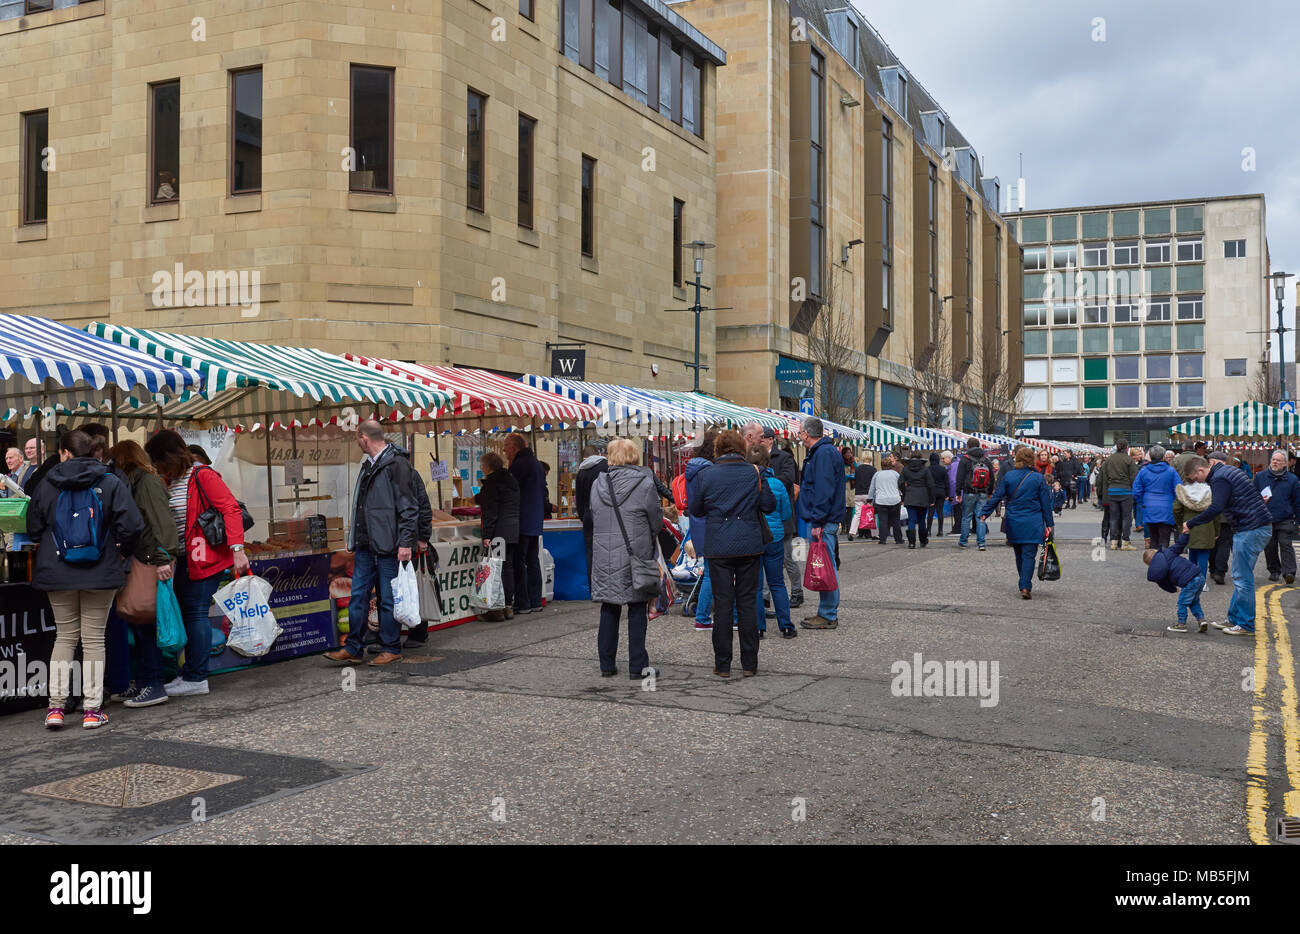 Some of the Stalls at the Farmers market held every month in the High Street and near St John's Shopping Centre in Perth, Perthshire, Scotland. Stock Photo